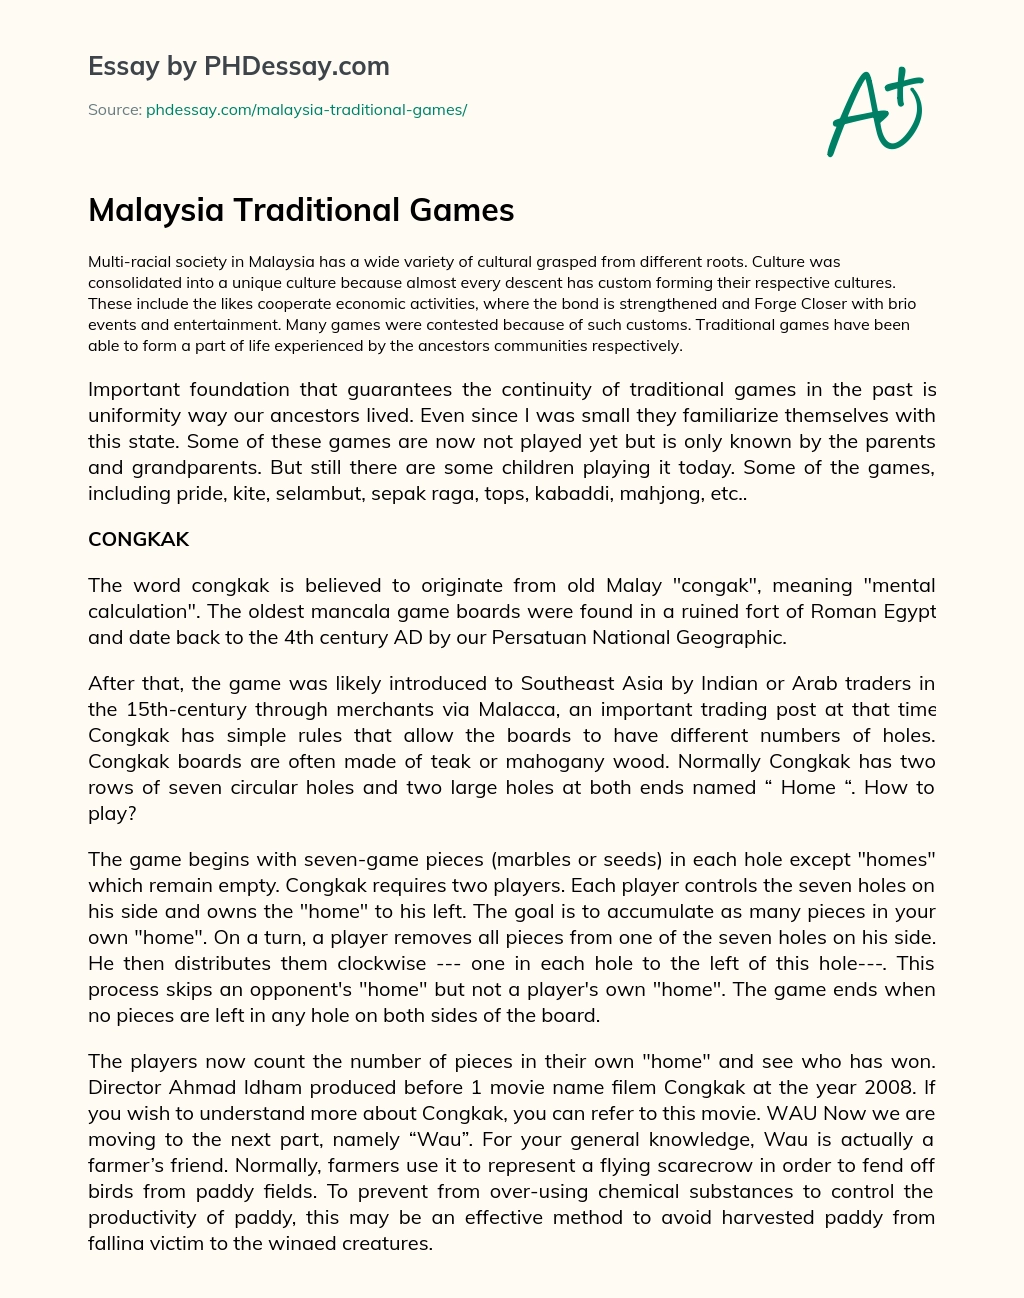 Malaysia Traditional Games essay